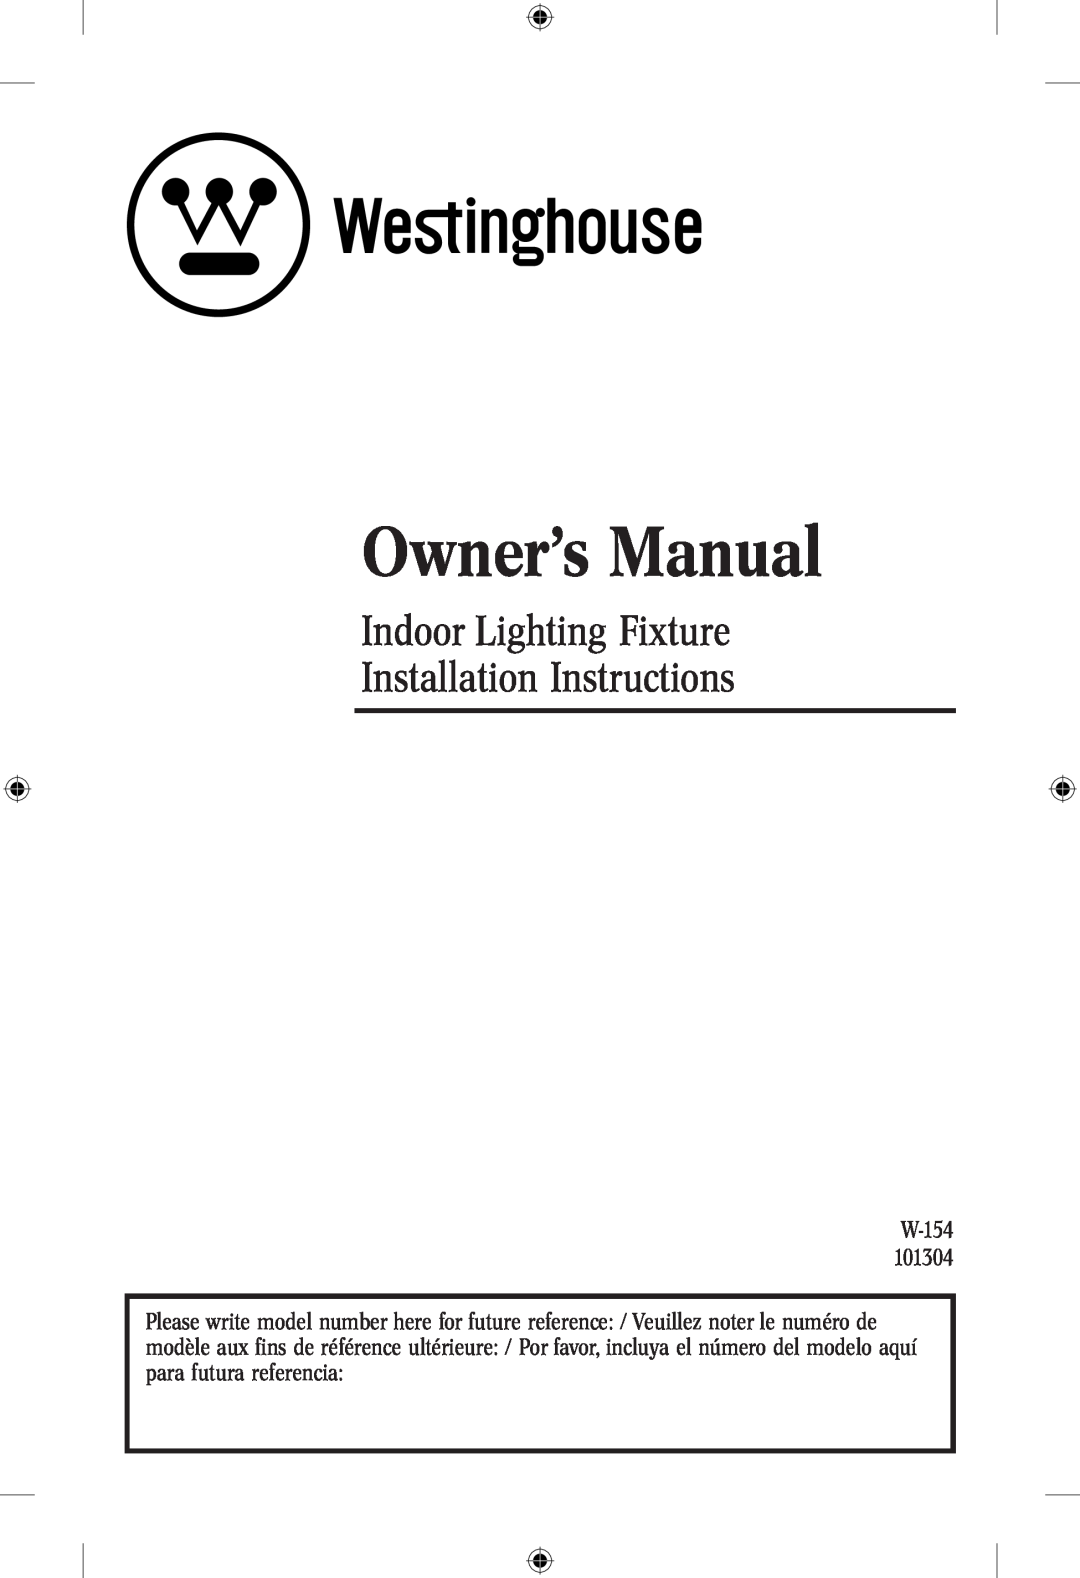 Westinghouse 101304 owner manual Indoor Lighting Fixture Installation Instructions 